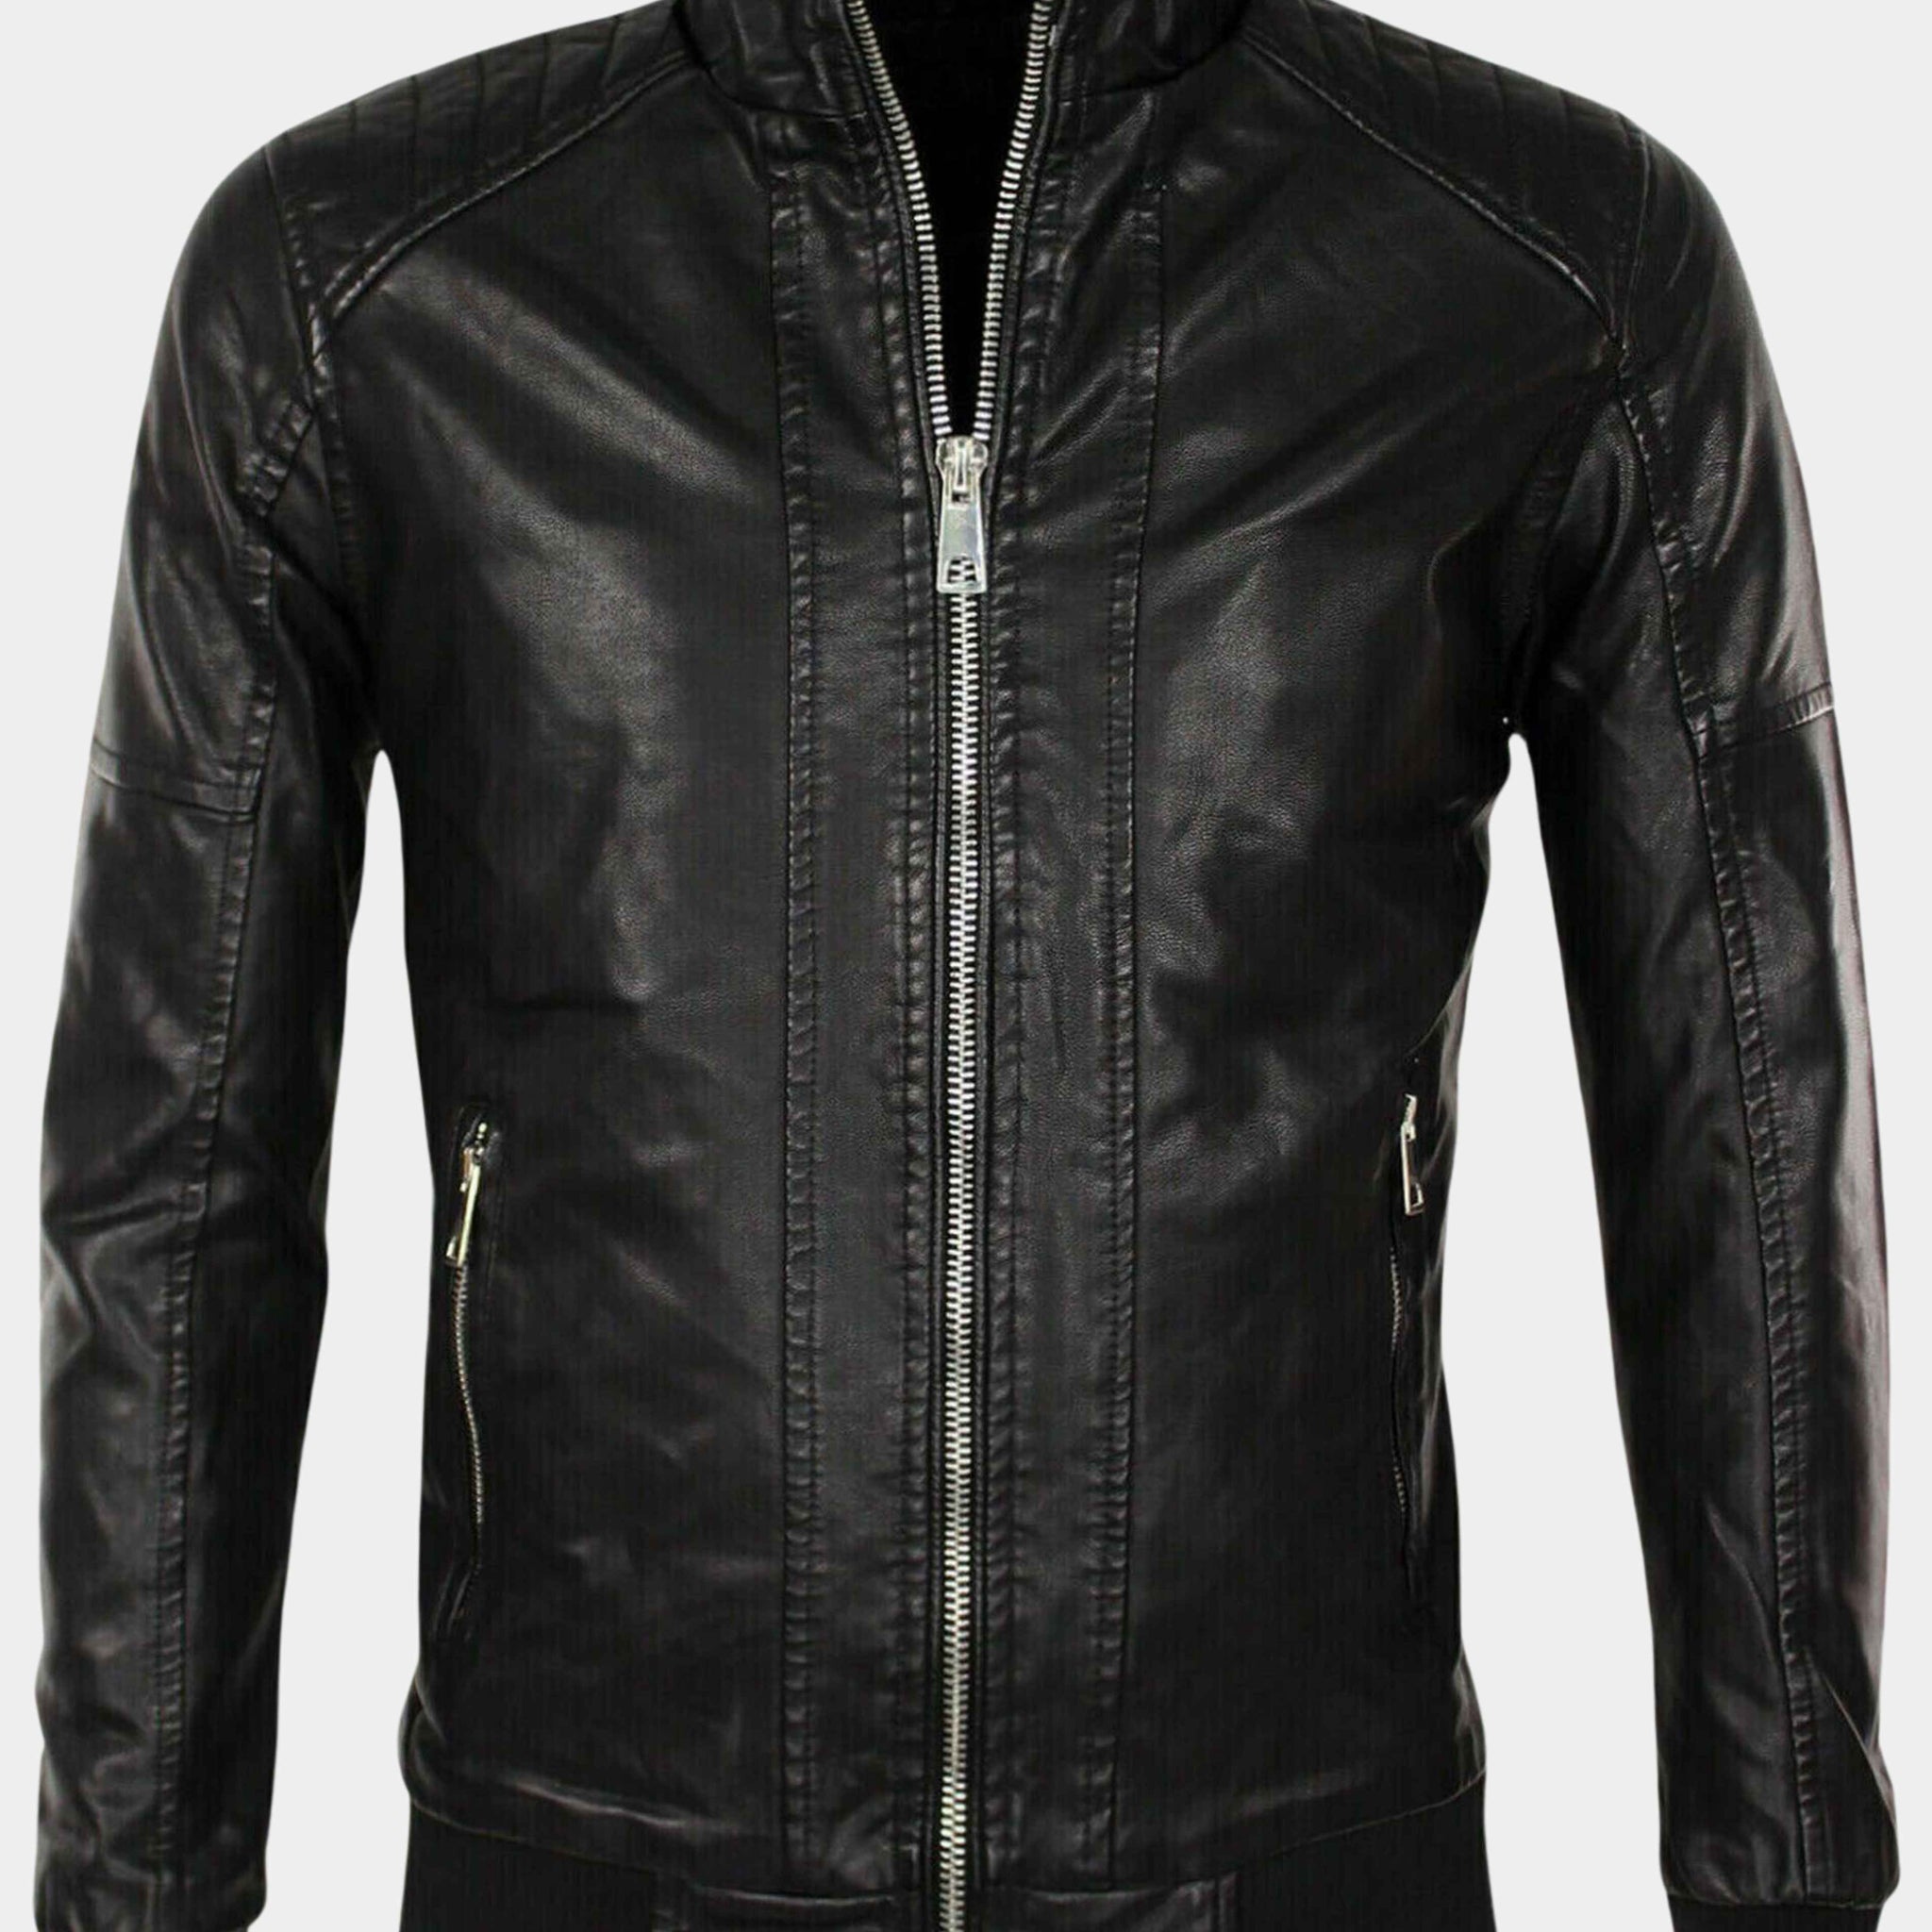 Black faux leather jacket with high collar